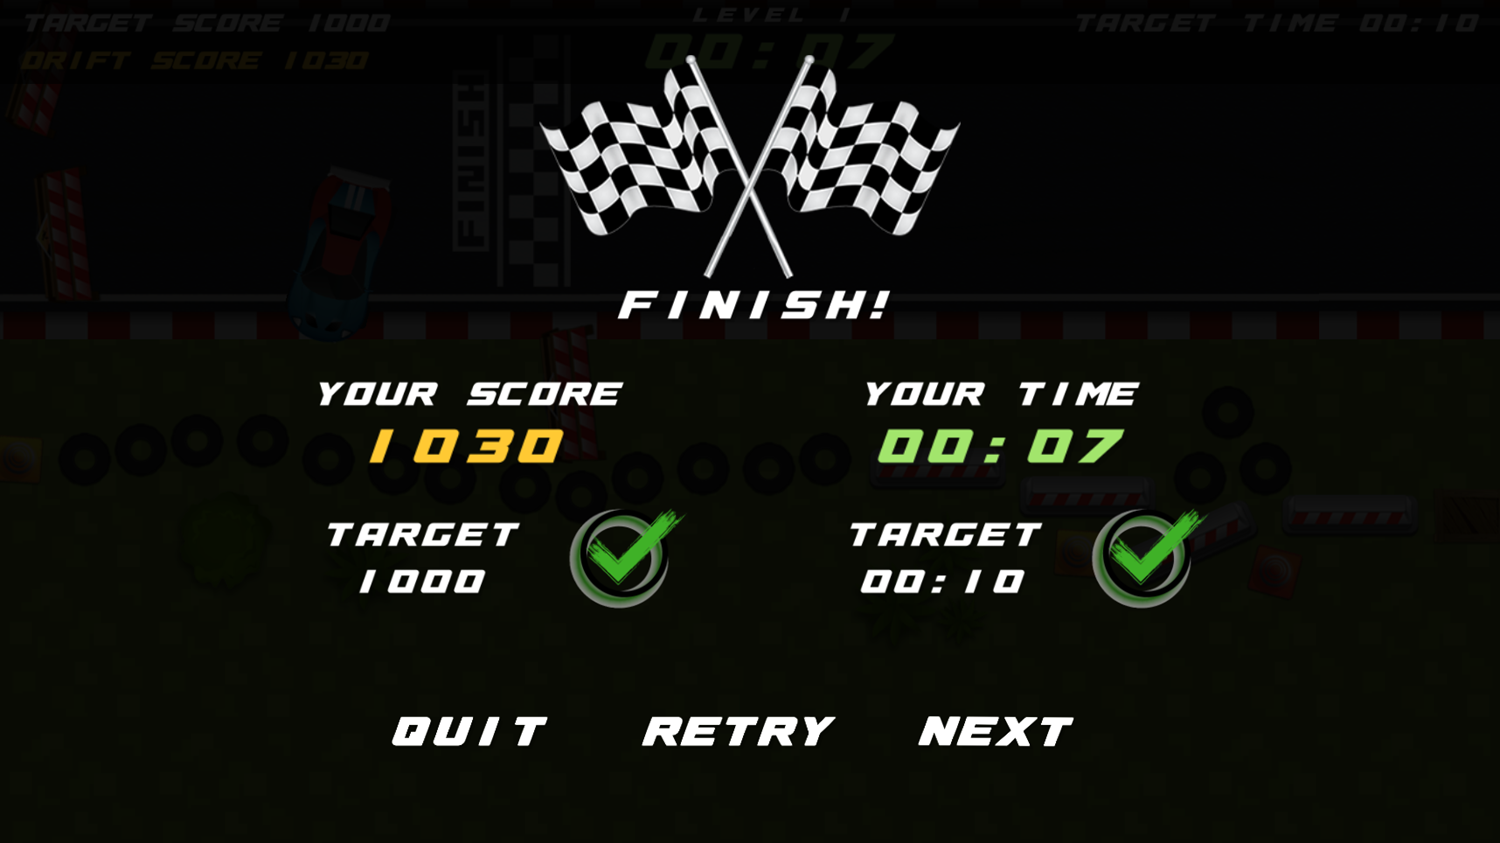 Drift Challenge Game Stage Complete Screenshot.